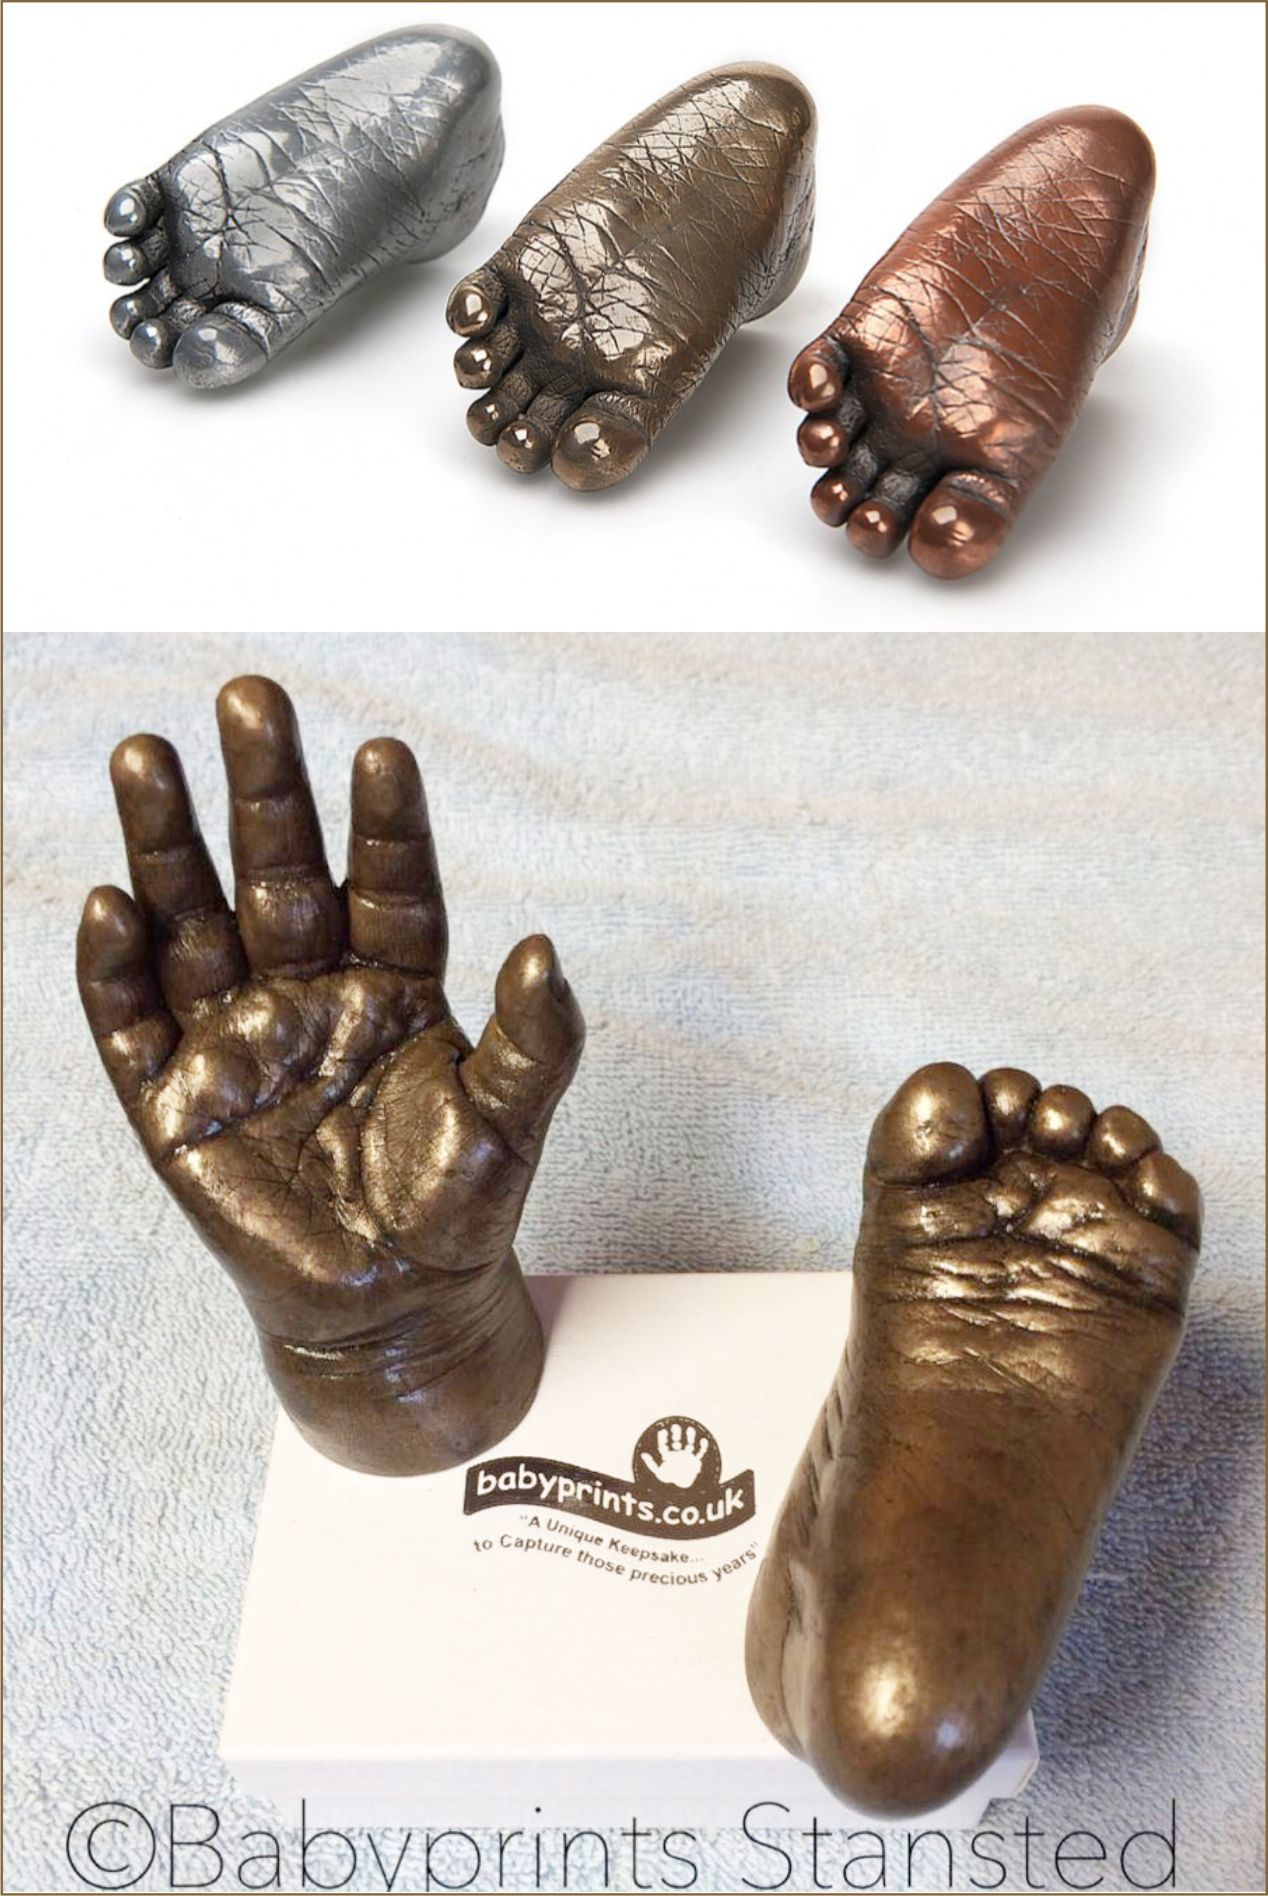 Hand and foot statues